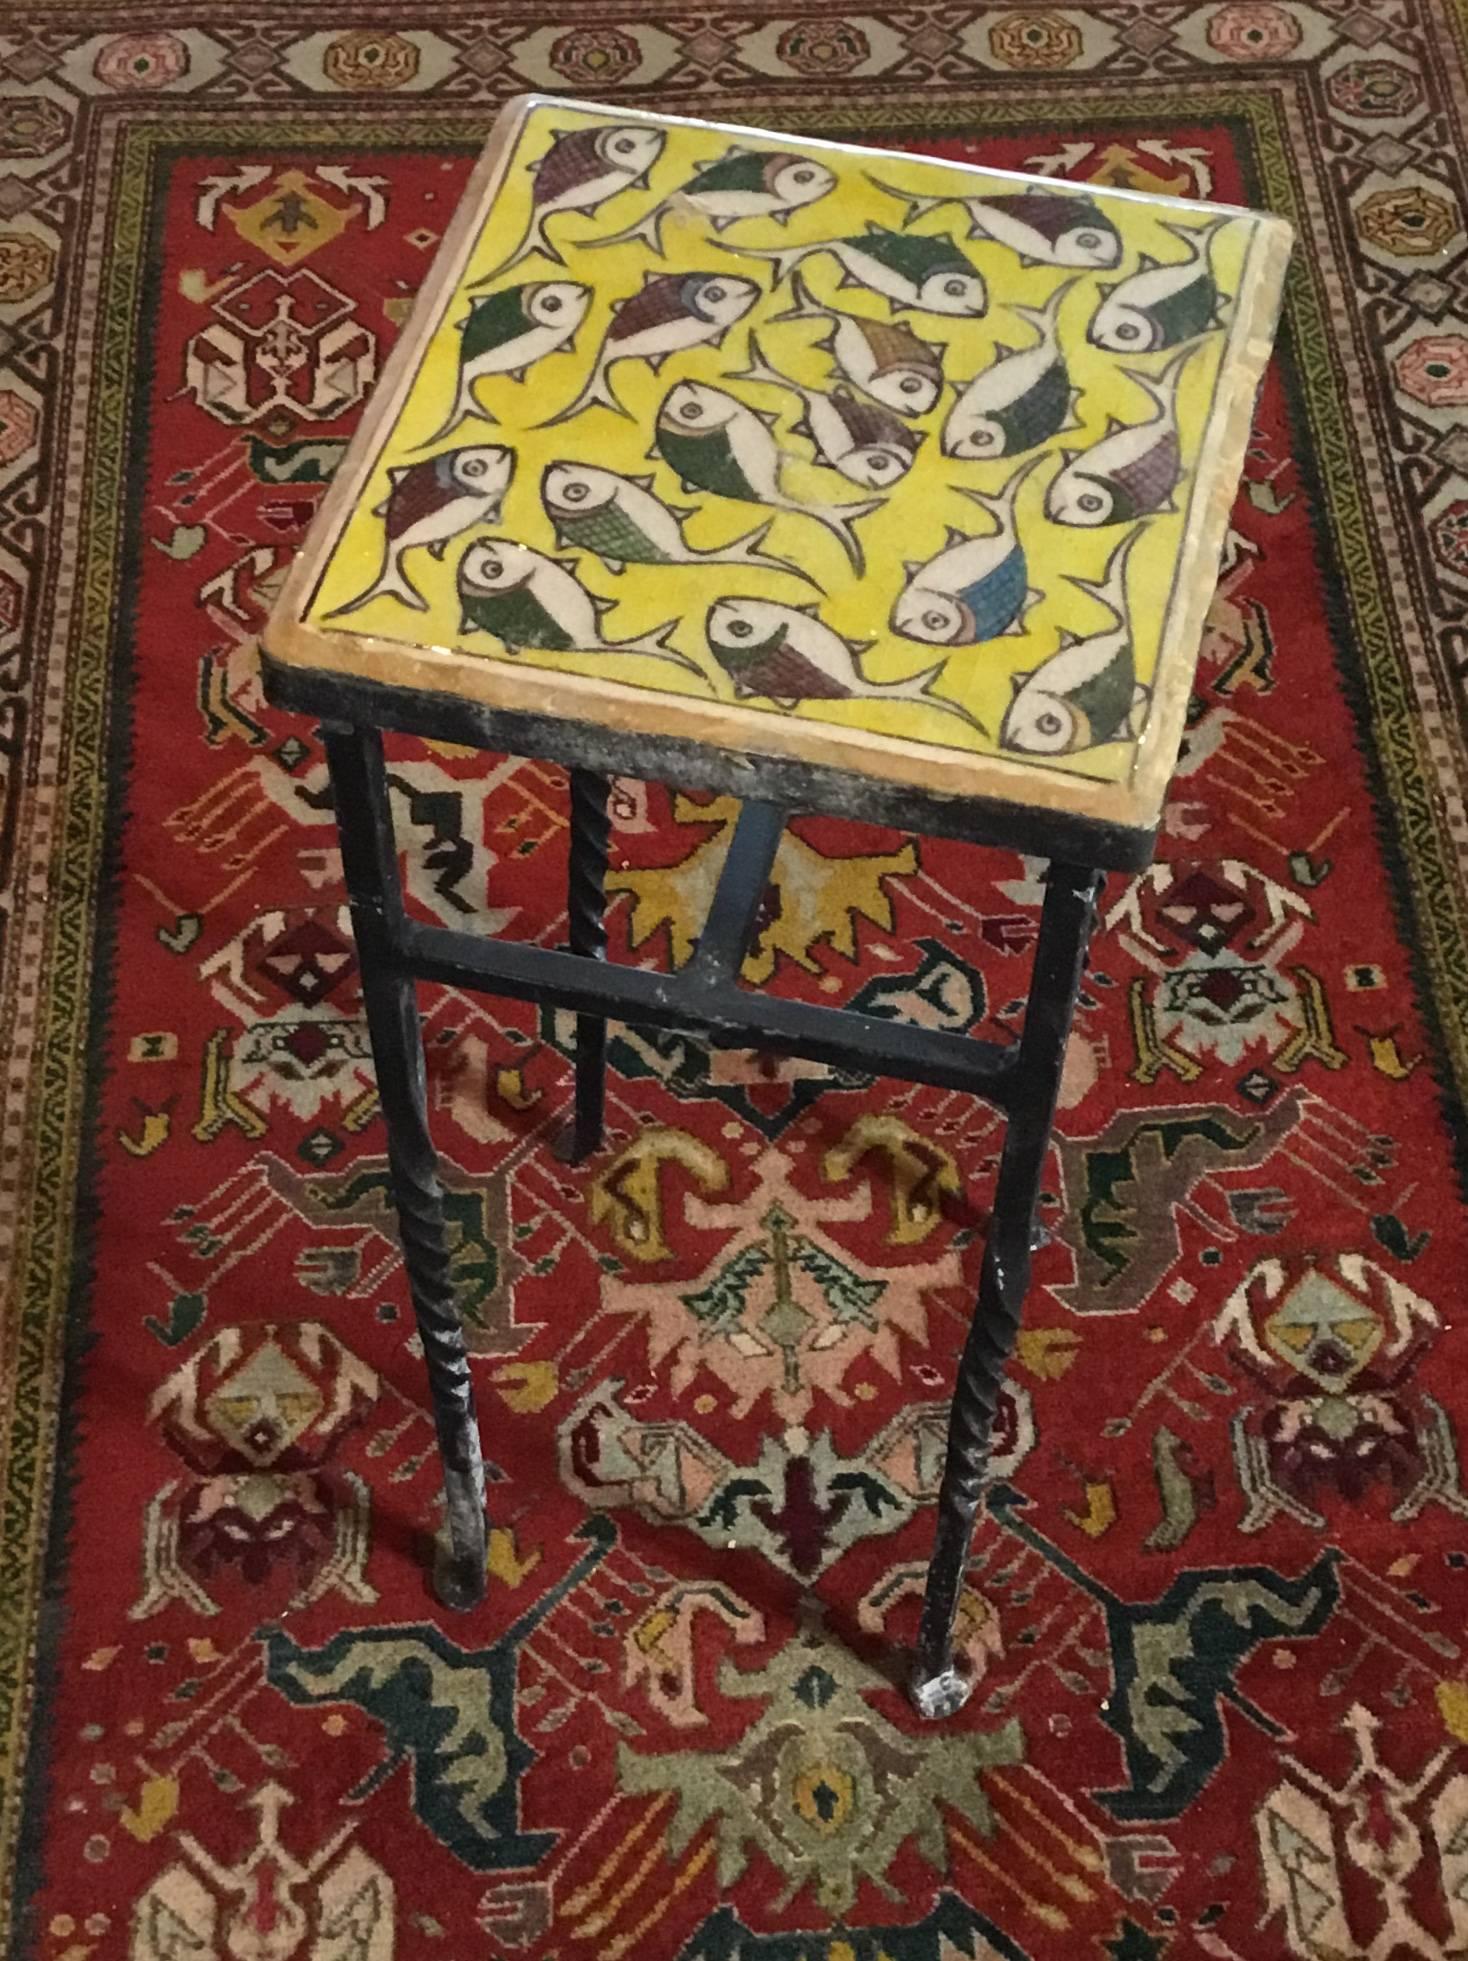 Elegant side table made of ceramic Persian tile top hand-painted and glazed of a wondering school of fish on a beautiful yellow background. The base of the table made of iron with four hand
twisted legs, very decorative and functional side table